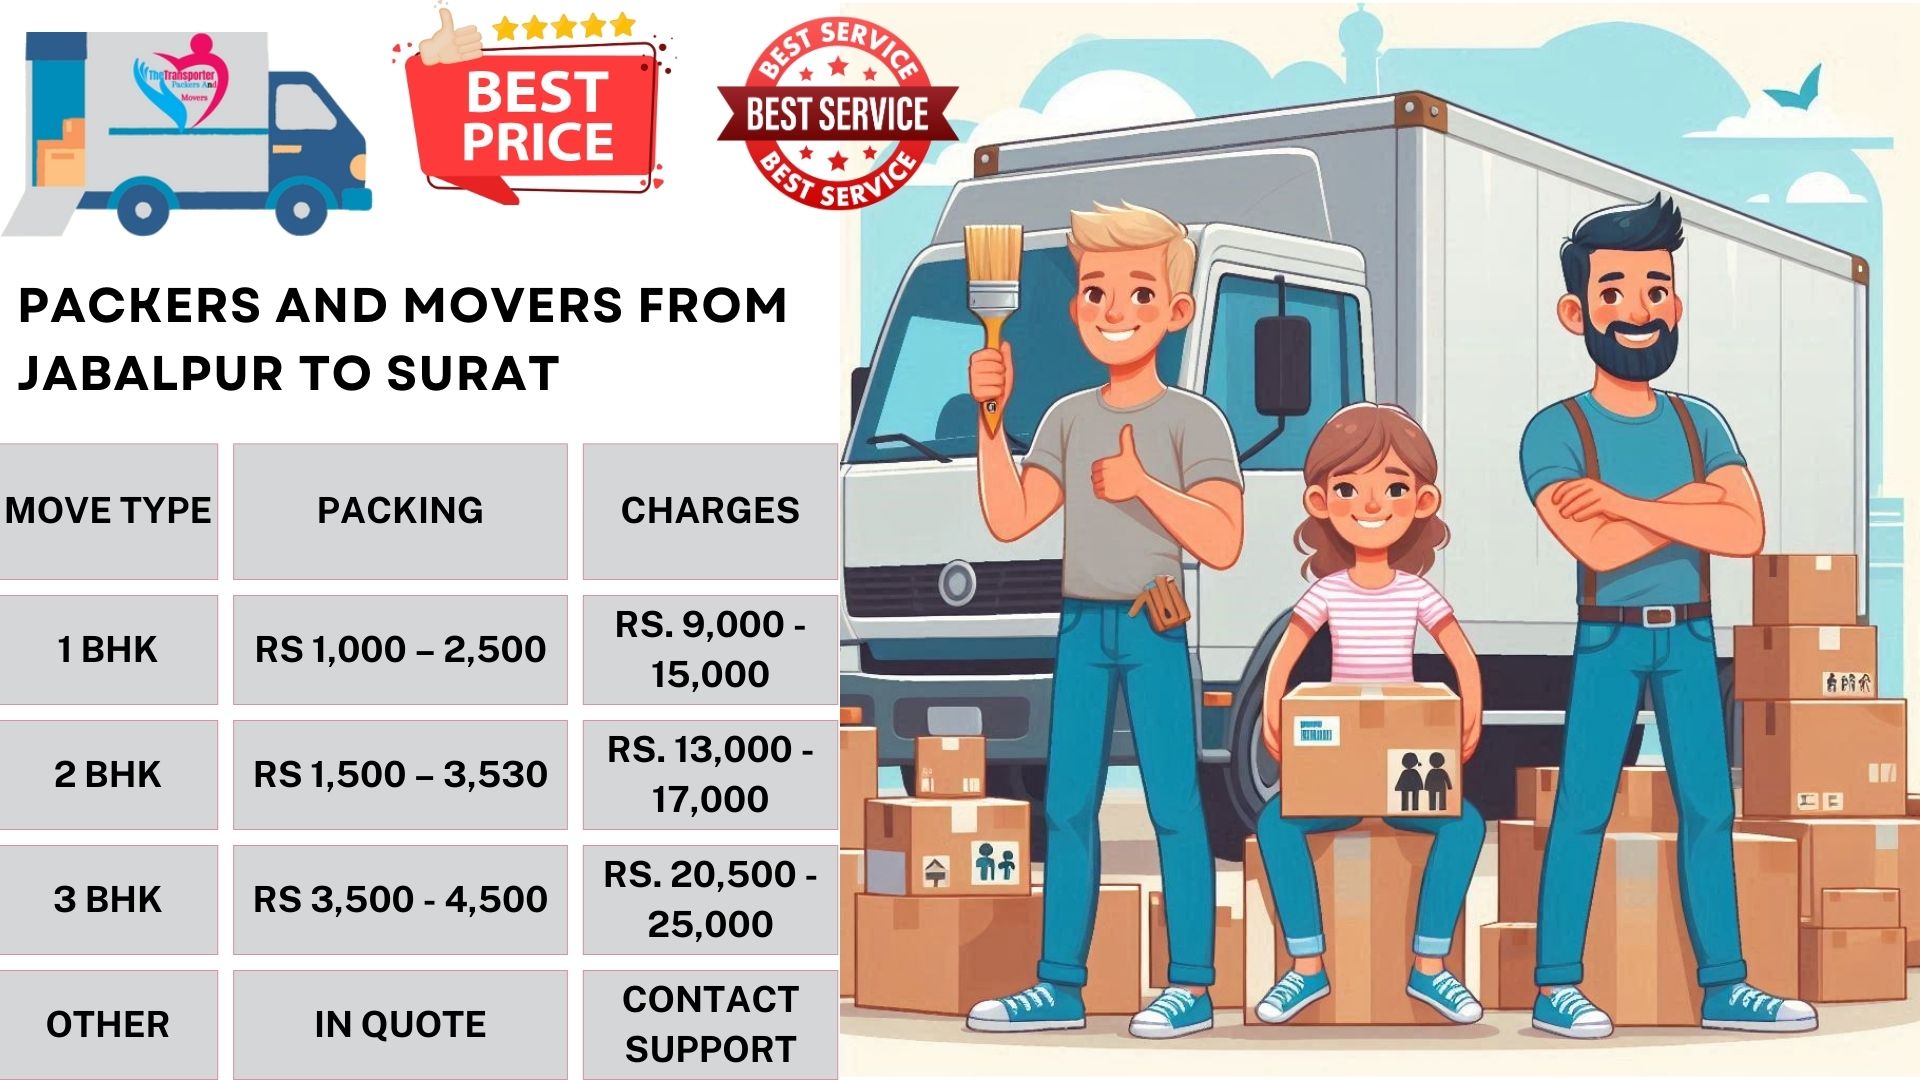 Your household goods shifting from Jabalpur to Surat